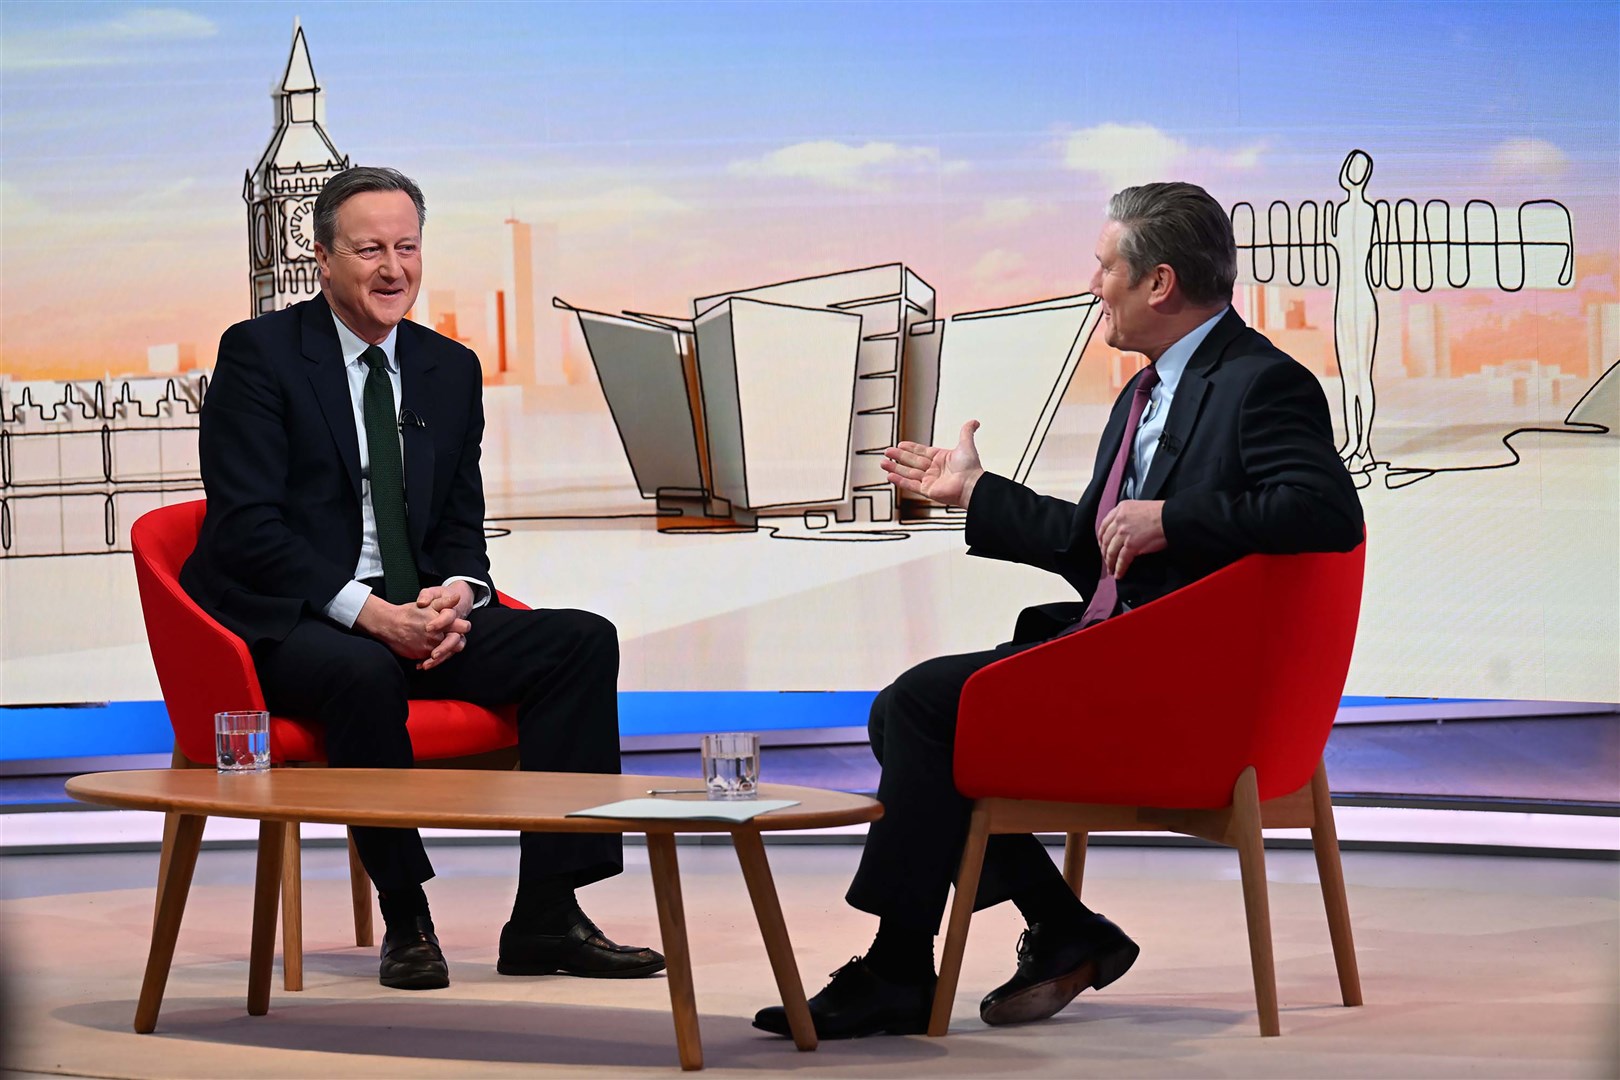 Foreign Secretary Lord Cameron and Labour leader Sir Keir Starmer on the BBC1 current affairs programme, Sunday with Laura Kuenssberg (Jeff Overs/BBC/PA)